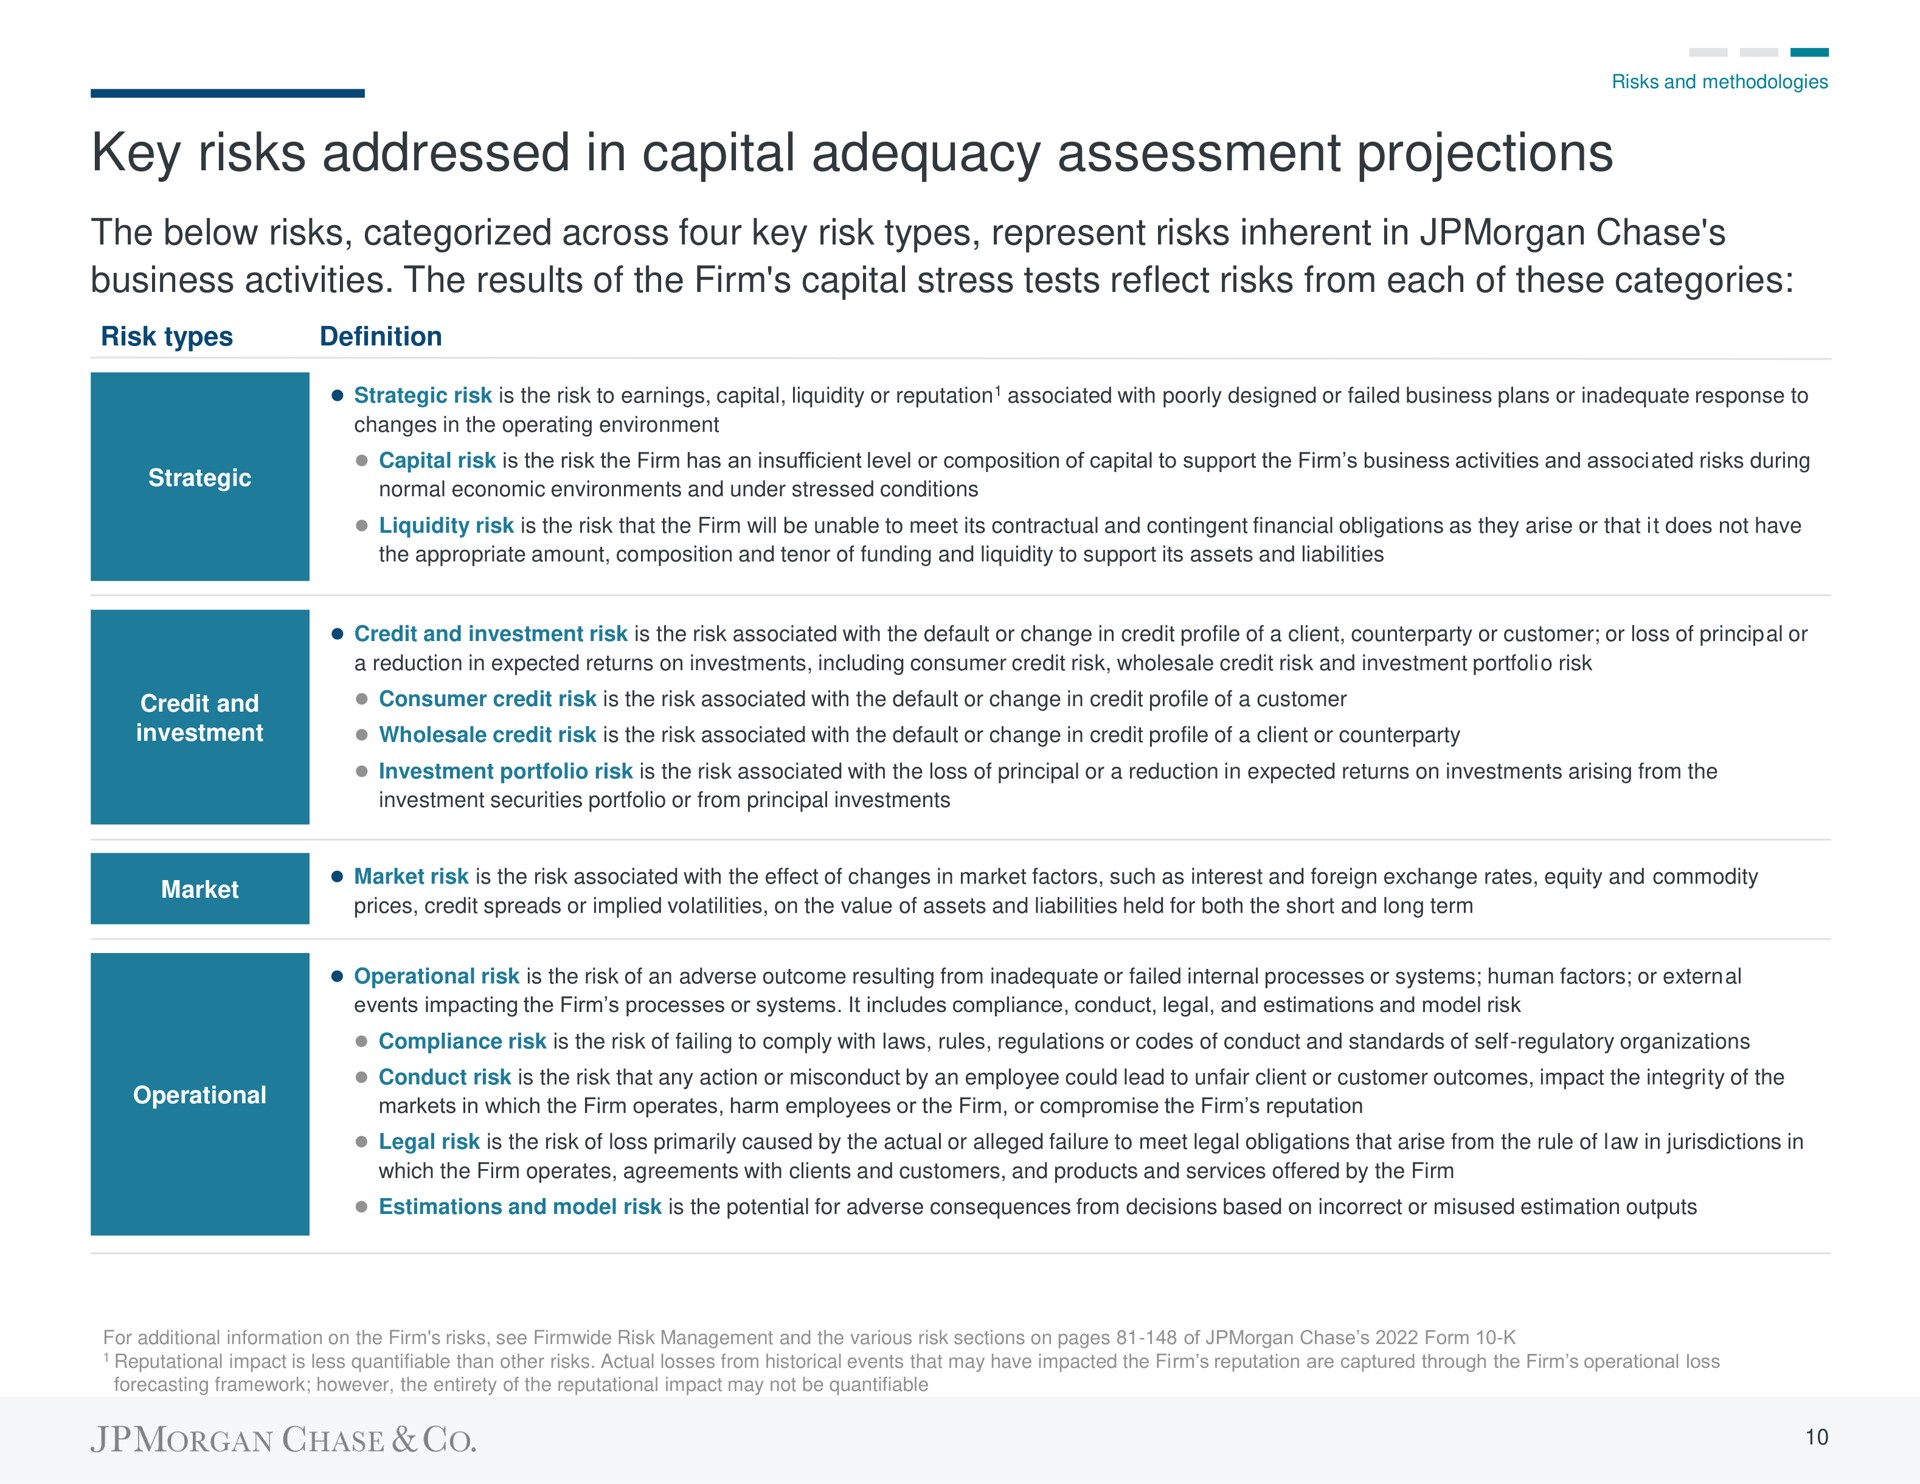 key risks addressed in capital adequacy assessment projections the below risks categorized across four key risk types represent risks inherent in chase business activities the results of the firm capital stress tests reflect risks from each of these categories | J.P.Morgan